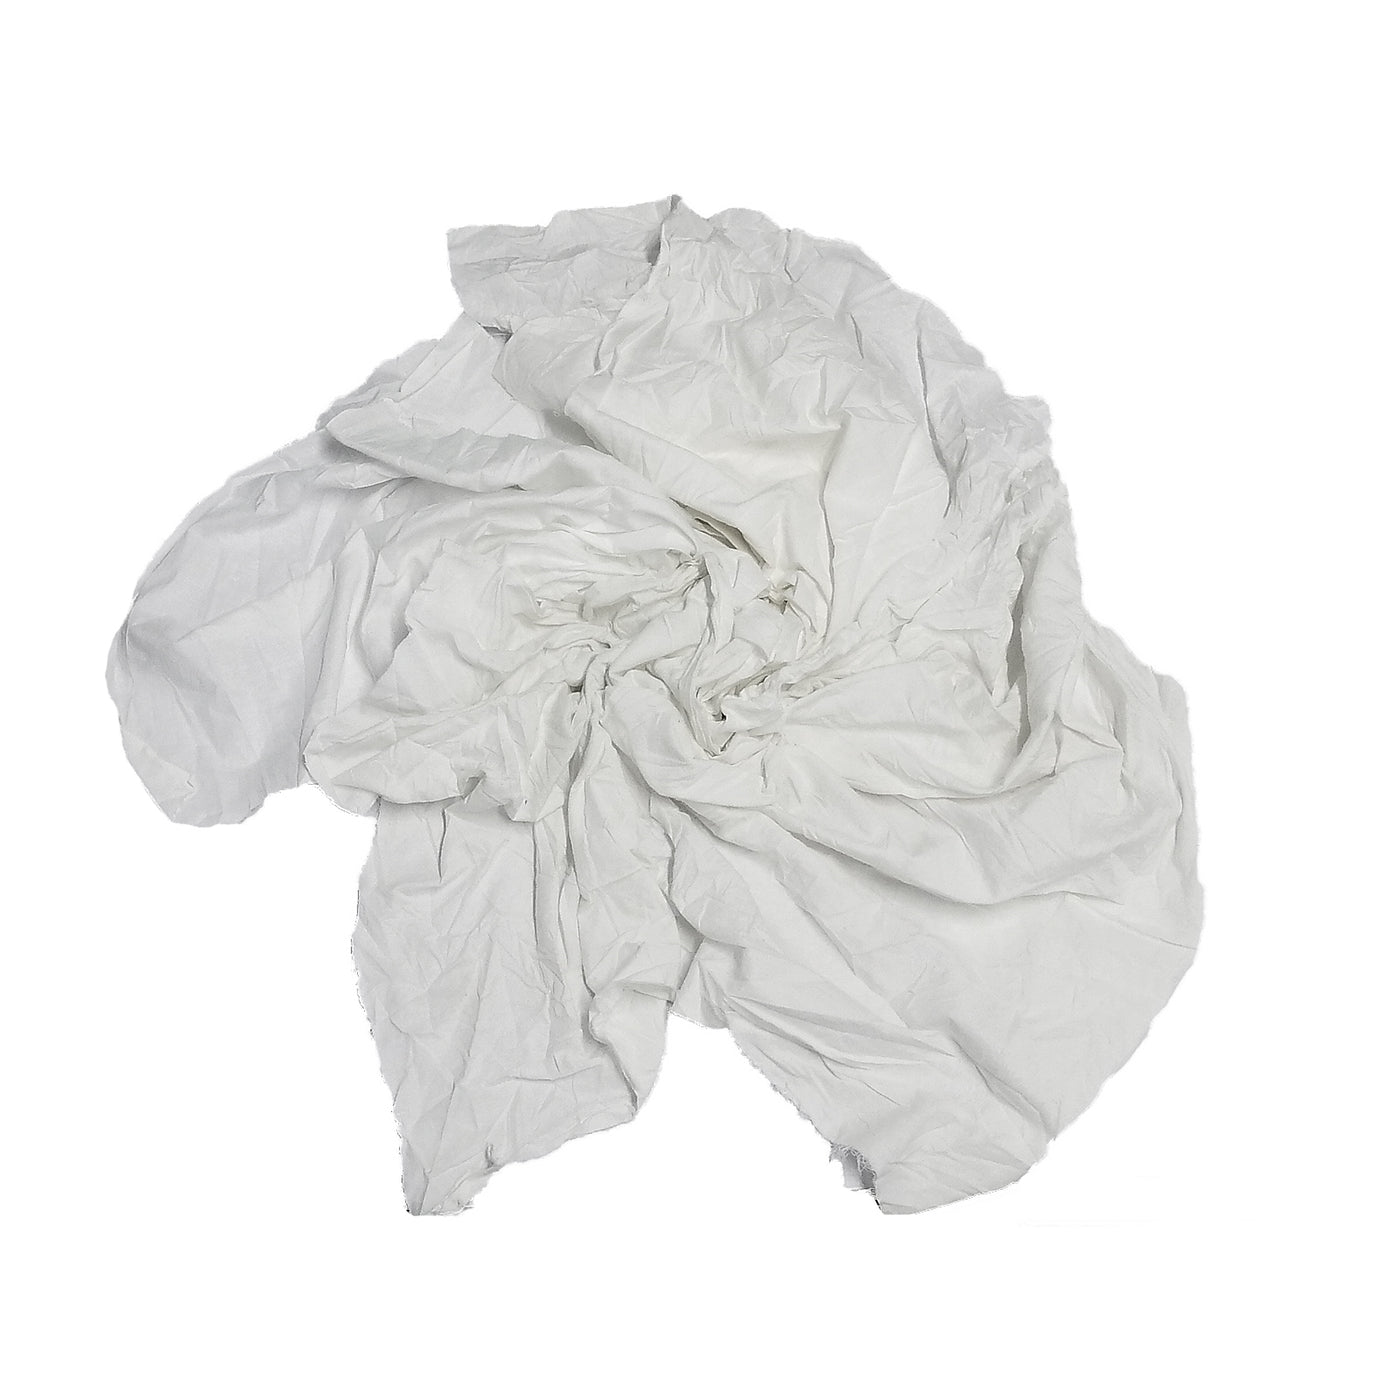 White Cotton Recycled Sheeting Rags Wiping Rags - 25 lbs. Box - Multip